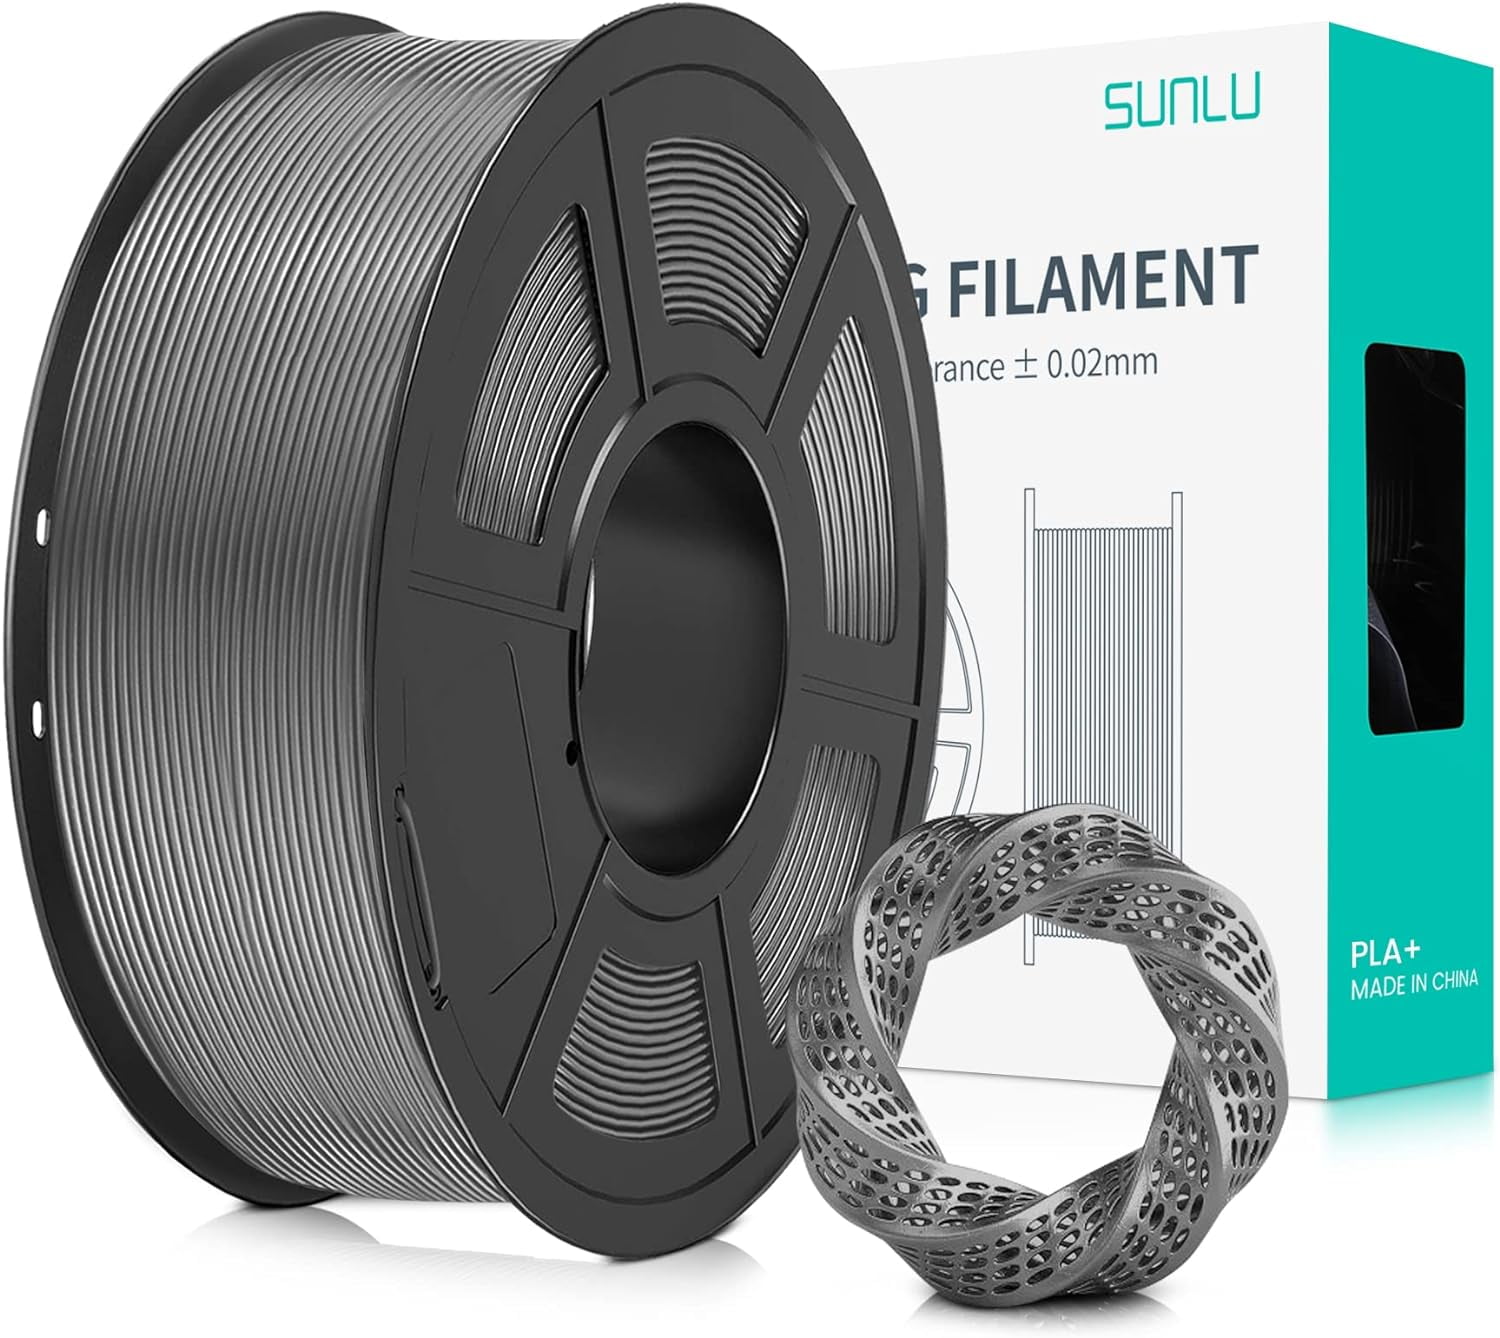 Gray Blue AF 1.75mm PLA Filament - Made in the USA!